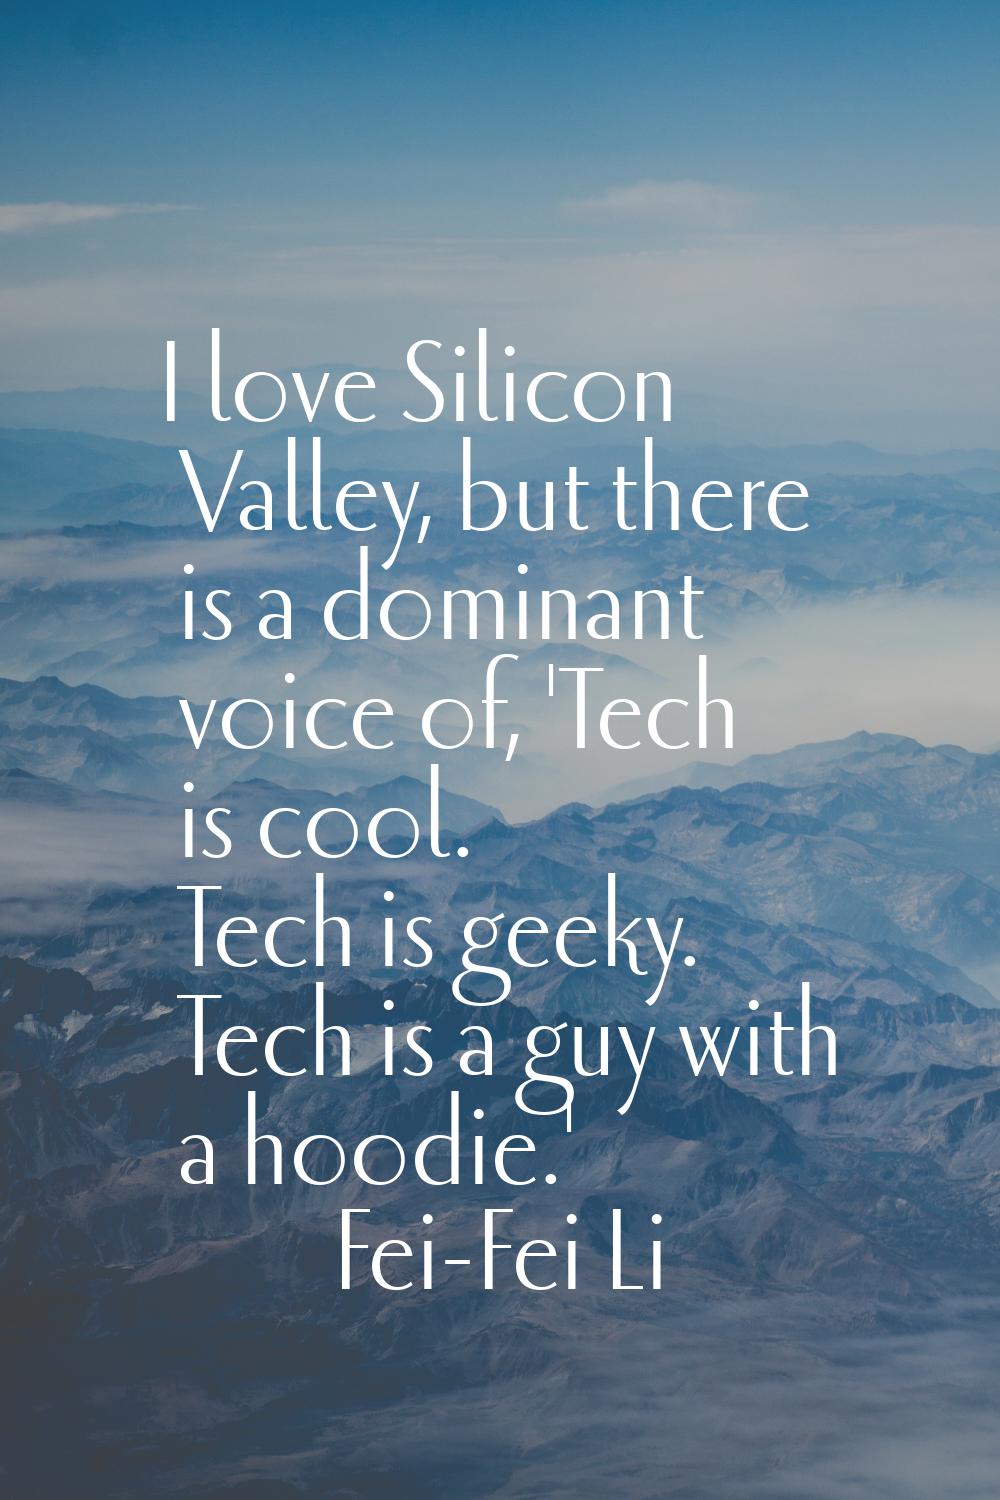 I love Silicon Valley, but there is a dominant voice of, 'Tech is cool. Tech is geeky. Tech is a gu